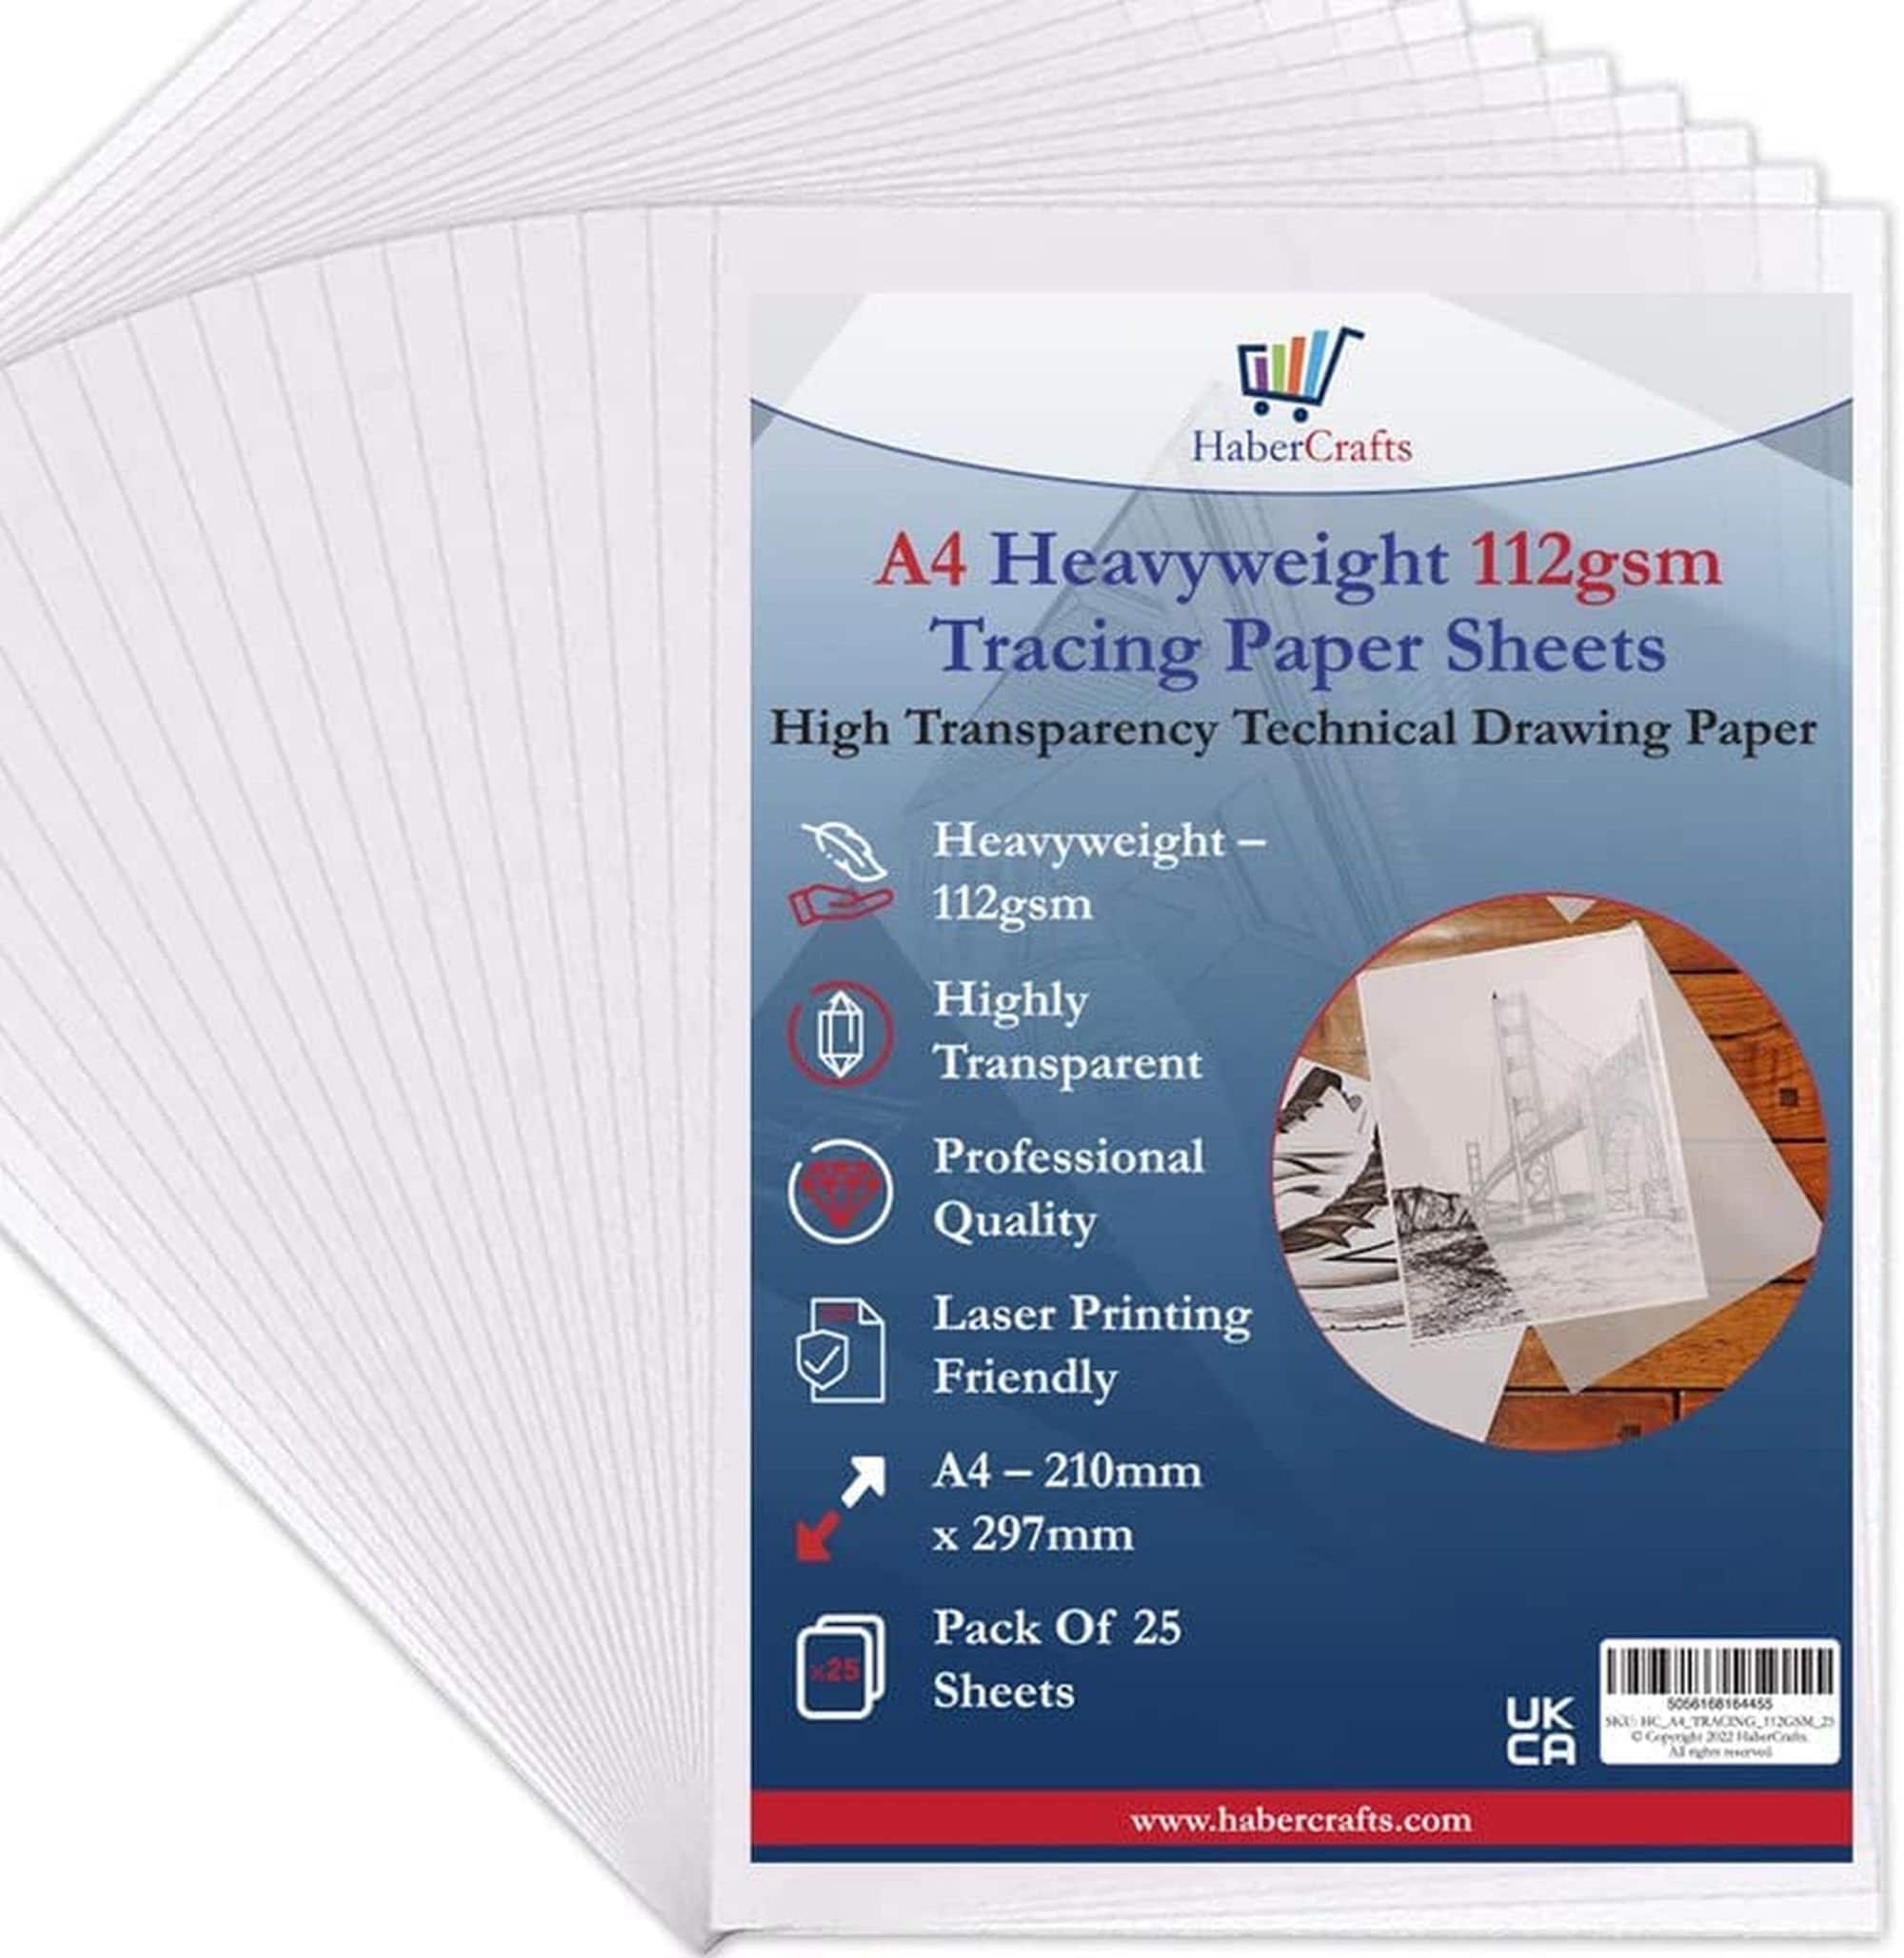 Swedish Tracing Paper, Pattern Paper, Drafting Paper, by the Roll 10 Yards  X 29 Inches SEE SHIPPING DETAILS in Product Description 